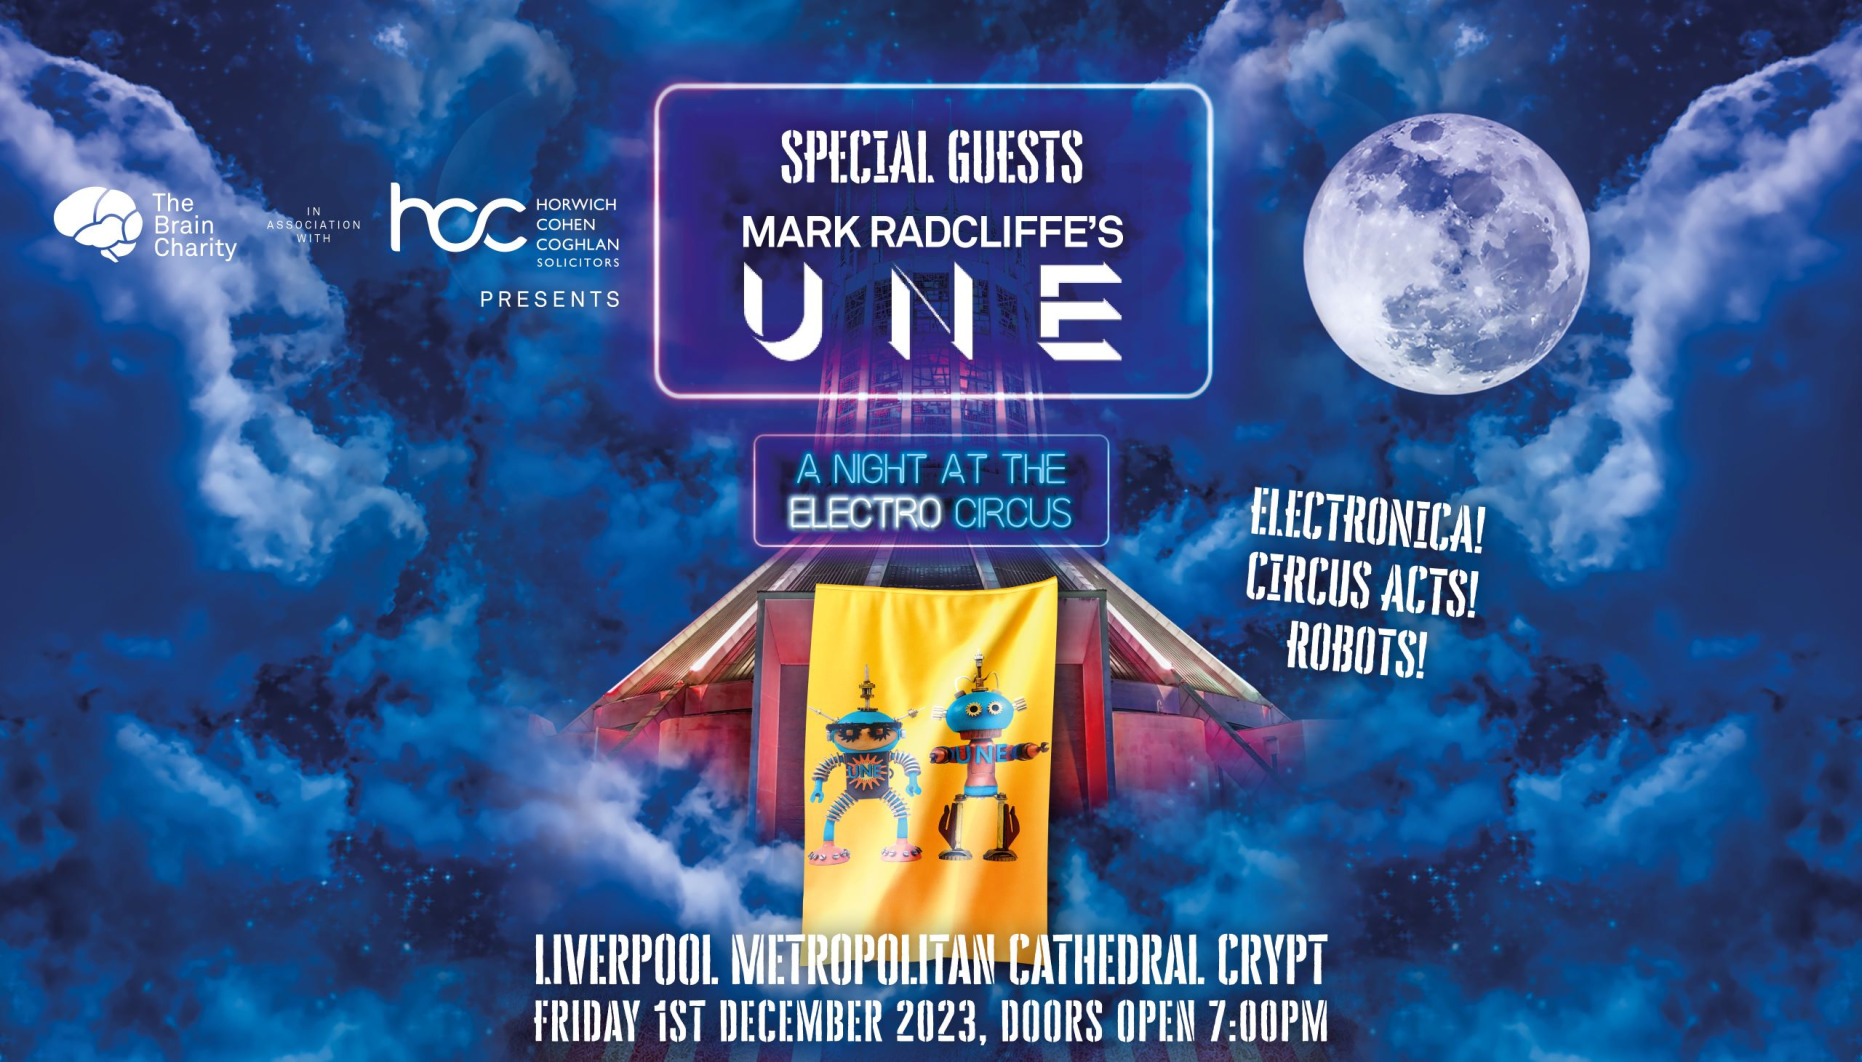 Artwork with Liverpool Metropolitan Cathedral enveloped in clouds. It's night and there's a moon in the sky. A neon sign says A Night at The Electro Circus. There is a banner in front of the cathedral for Mark Radcliffe's band UNE who are headliners on the night.